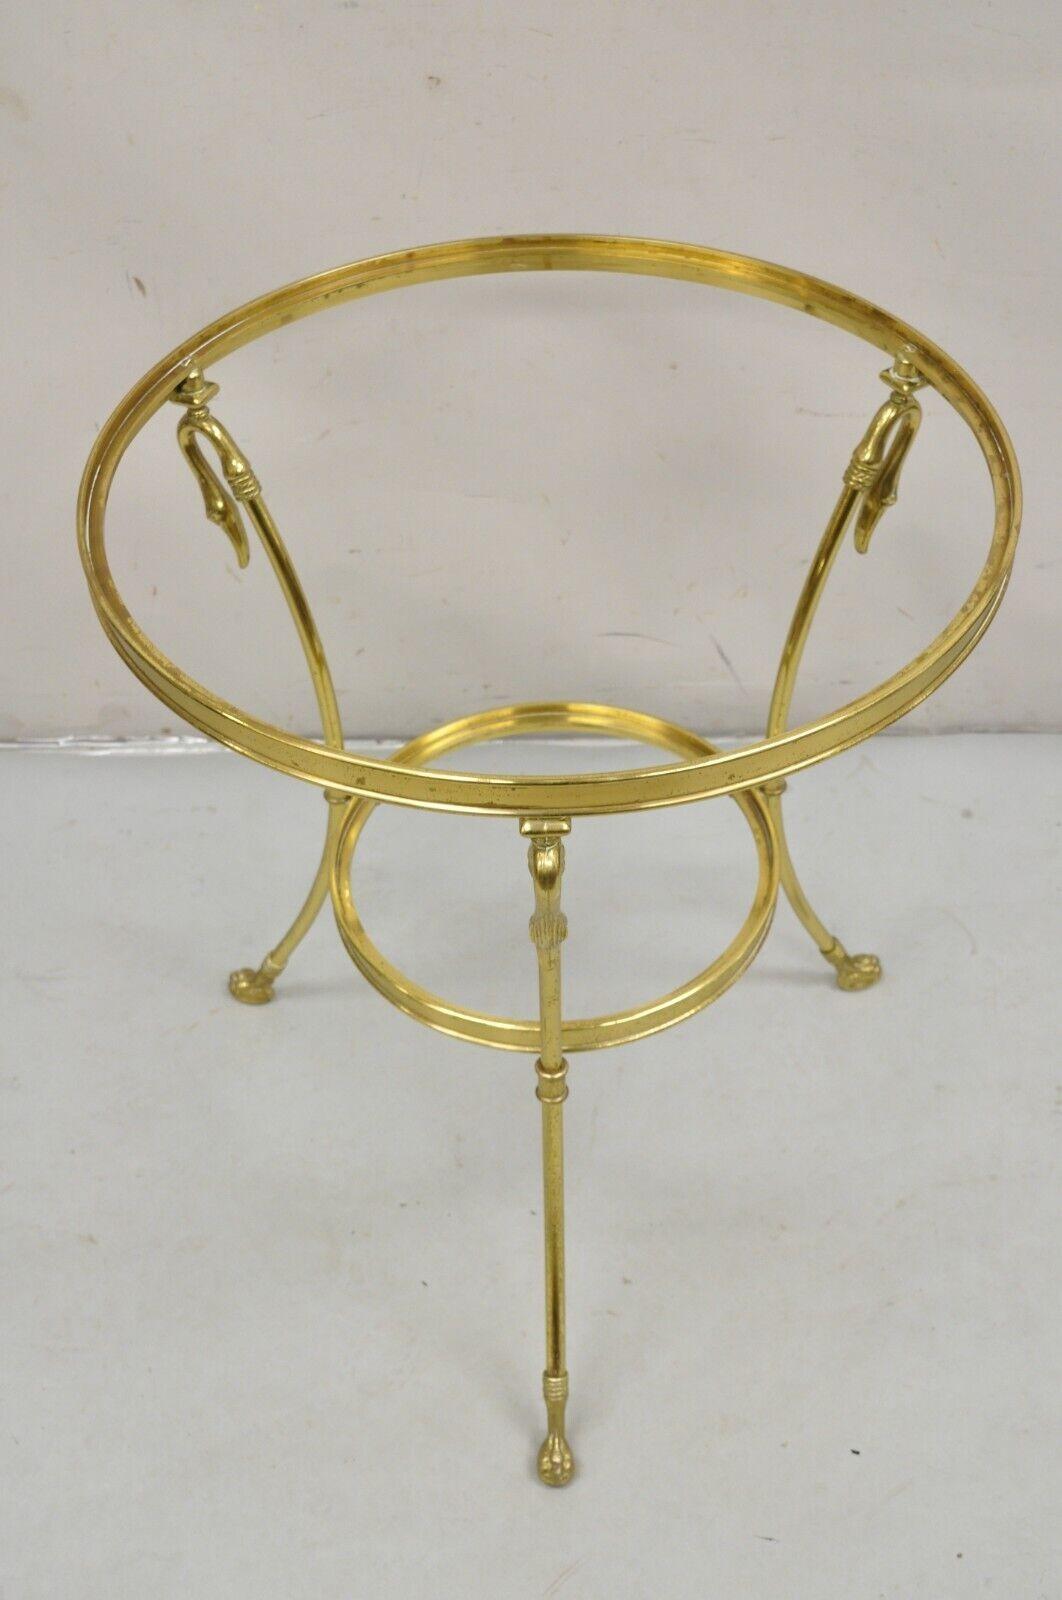 Vintage Italian Hollywood Regency Brass Swan Tripod 2 Tier Round Occasional Side Table (Does NOT include glass) Circa 1980s
Measurements: 26.75